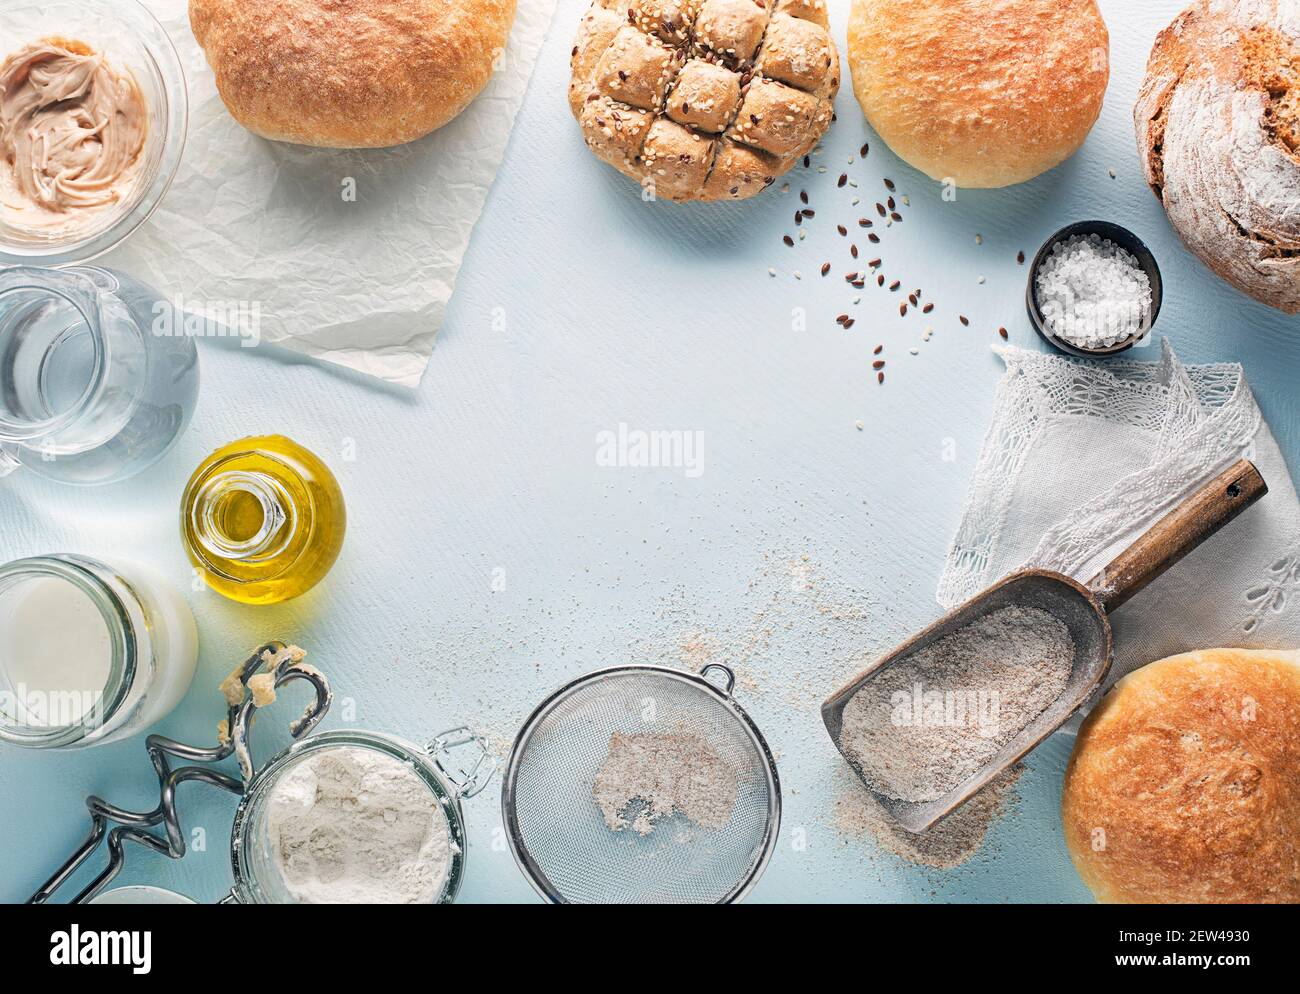 Ingredients for making and baking homemade bread on blue table background Stock Photo